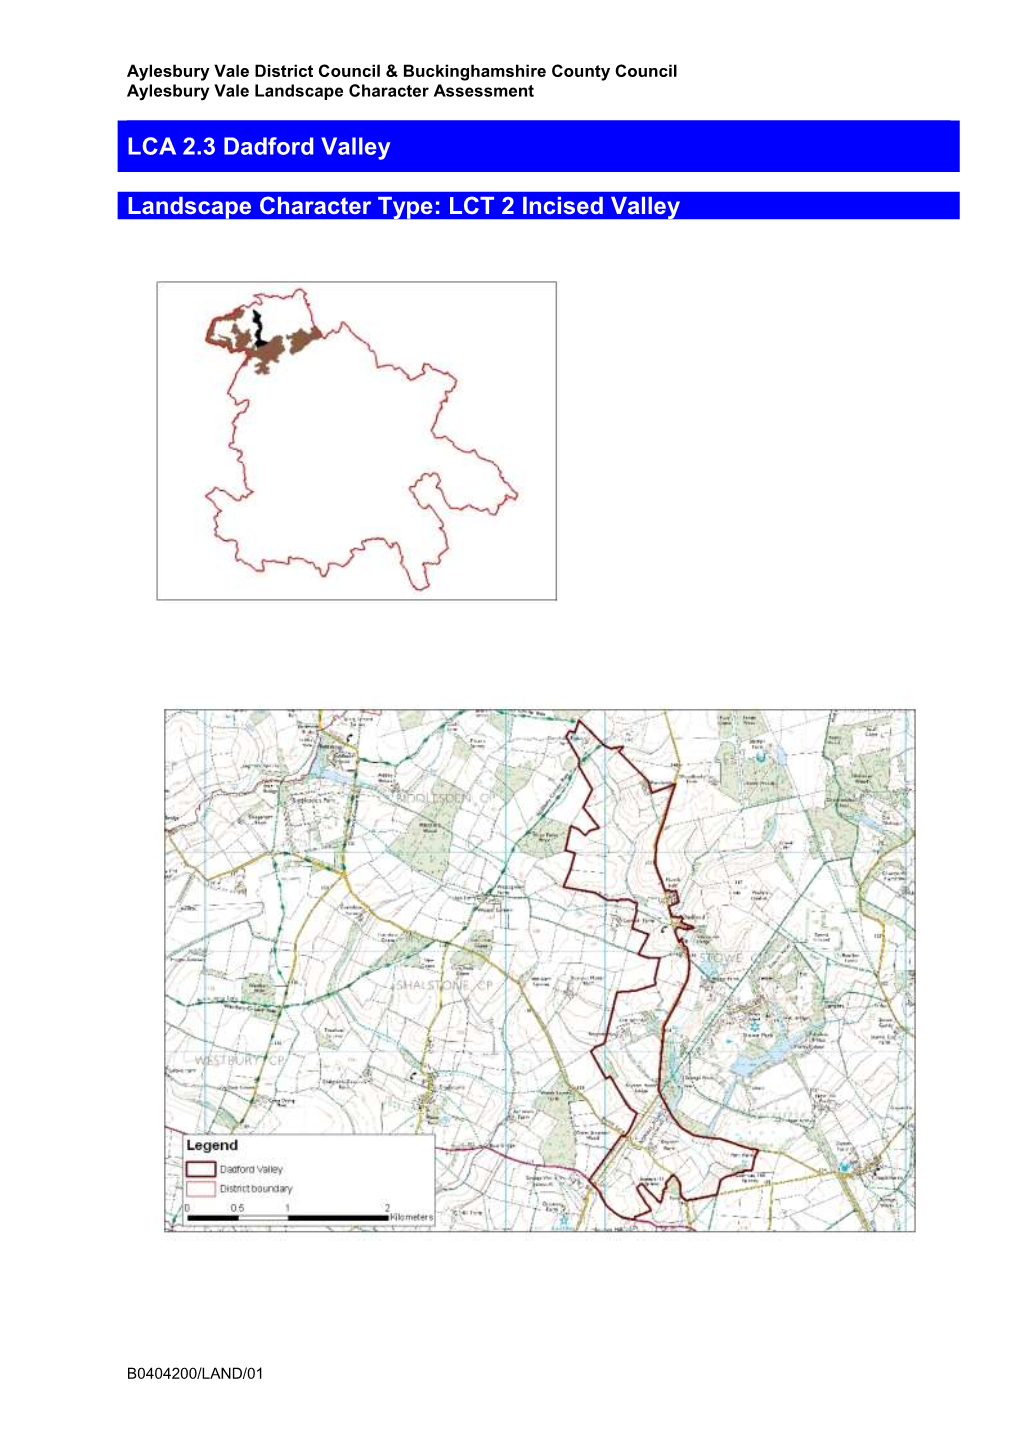 LCA 2.3 Dadford Valley Revised